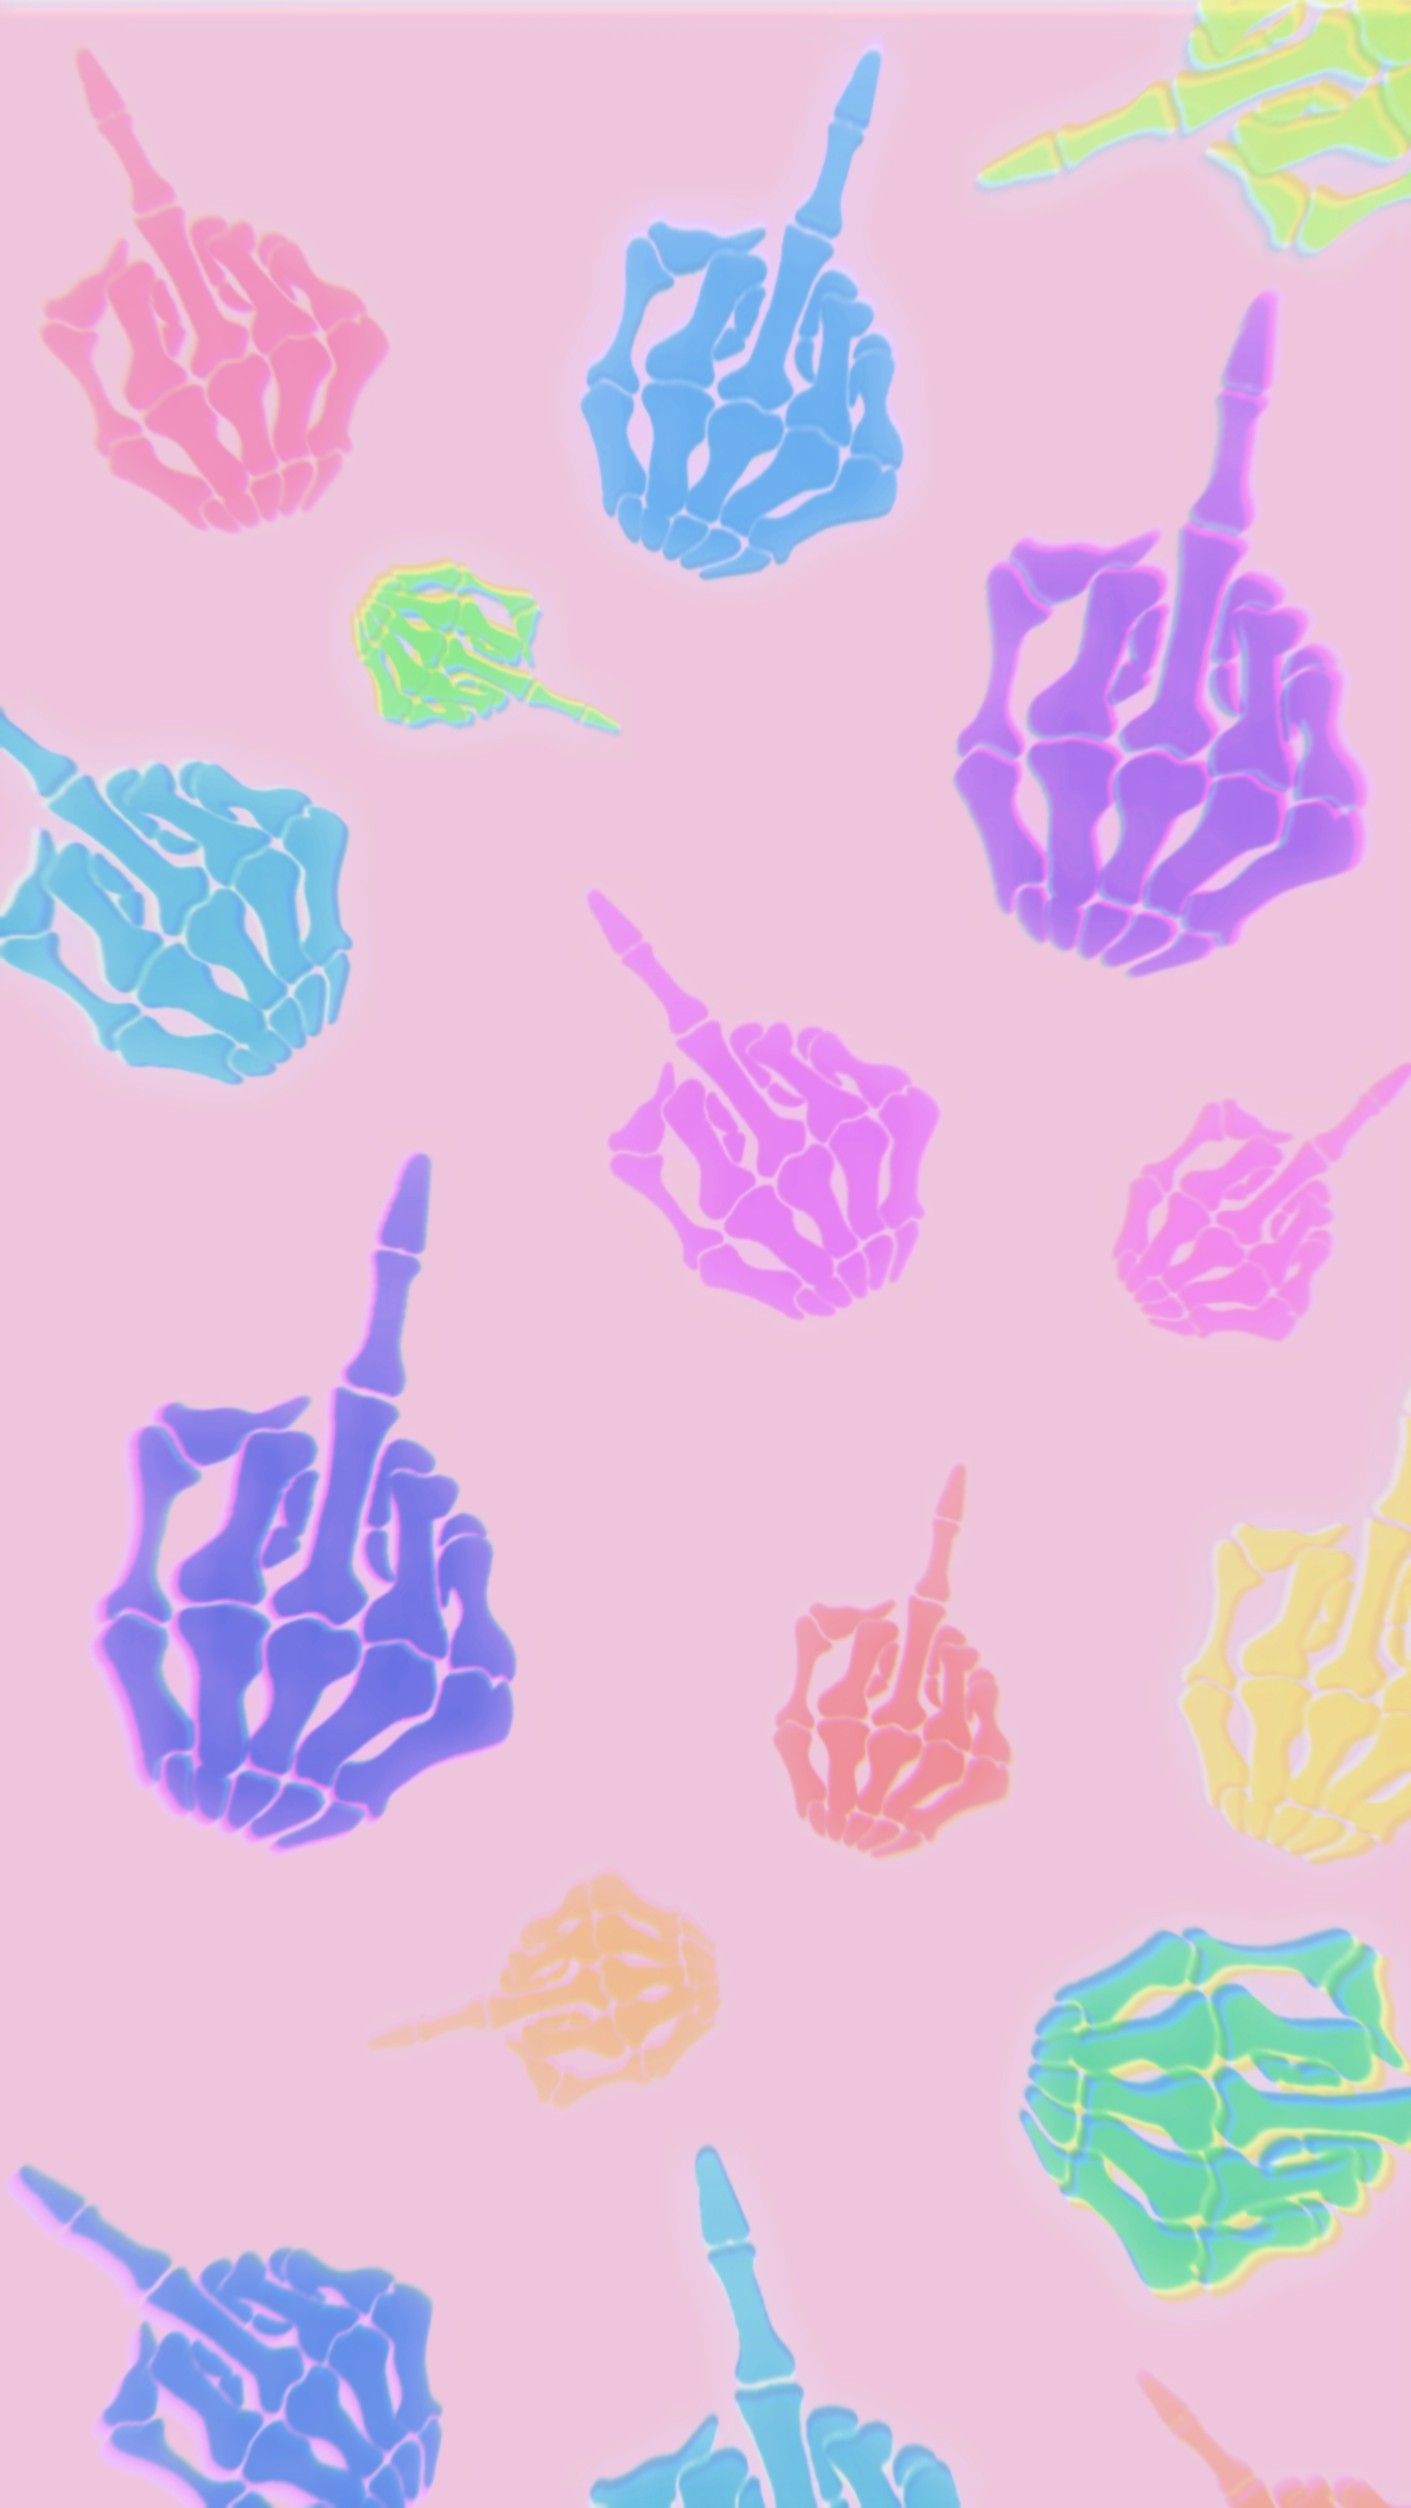 Middle Finger Wallpapers - Top 30 Best Middle Finger Wallpapers Download